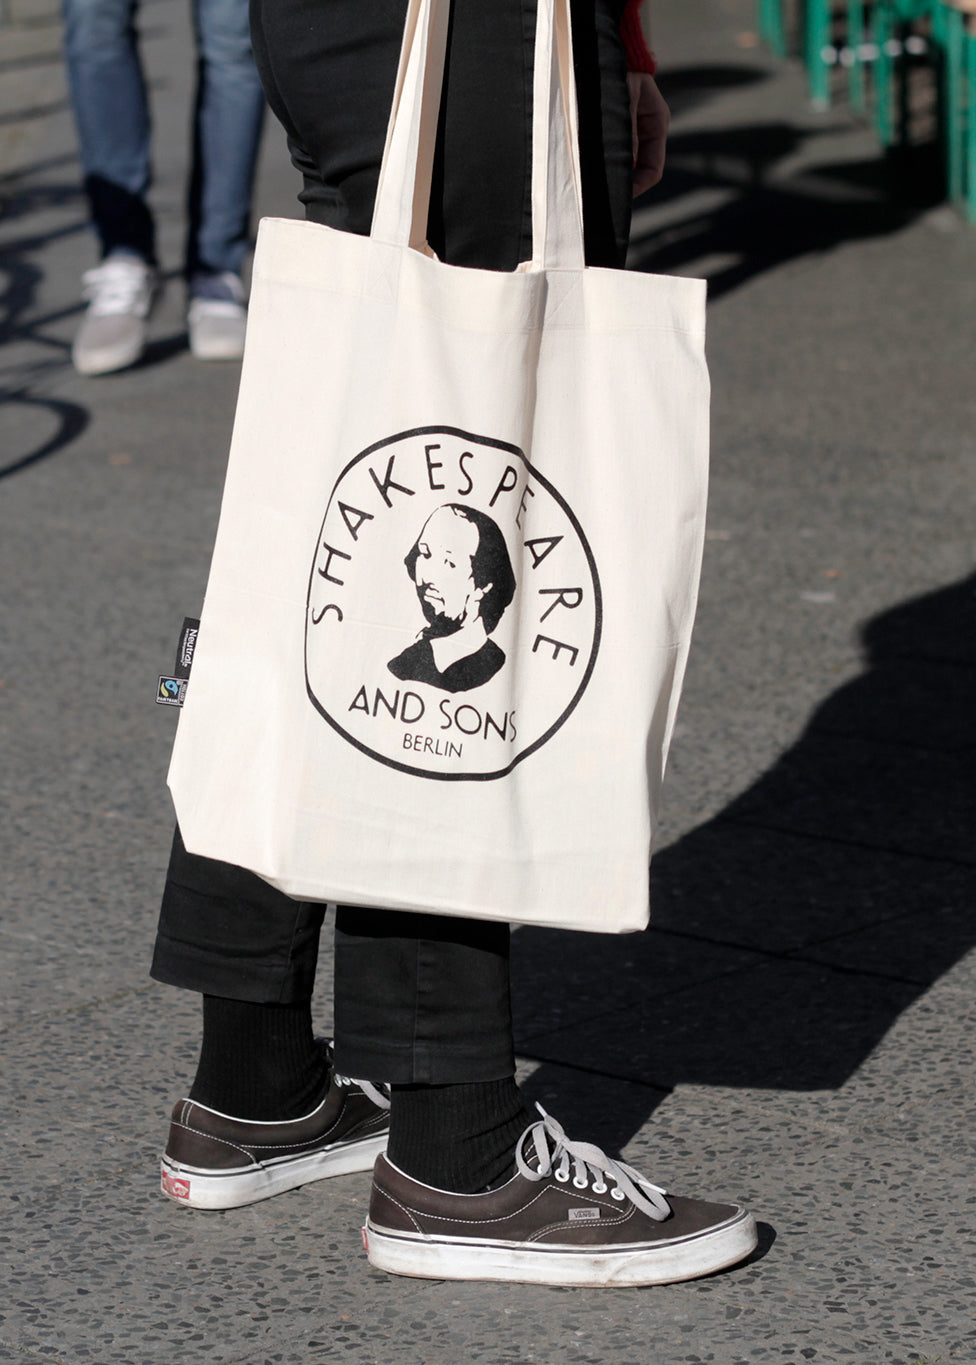 Shakespeare & Sons / Fine Bagels Tote Bag